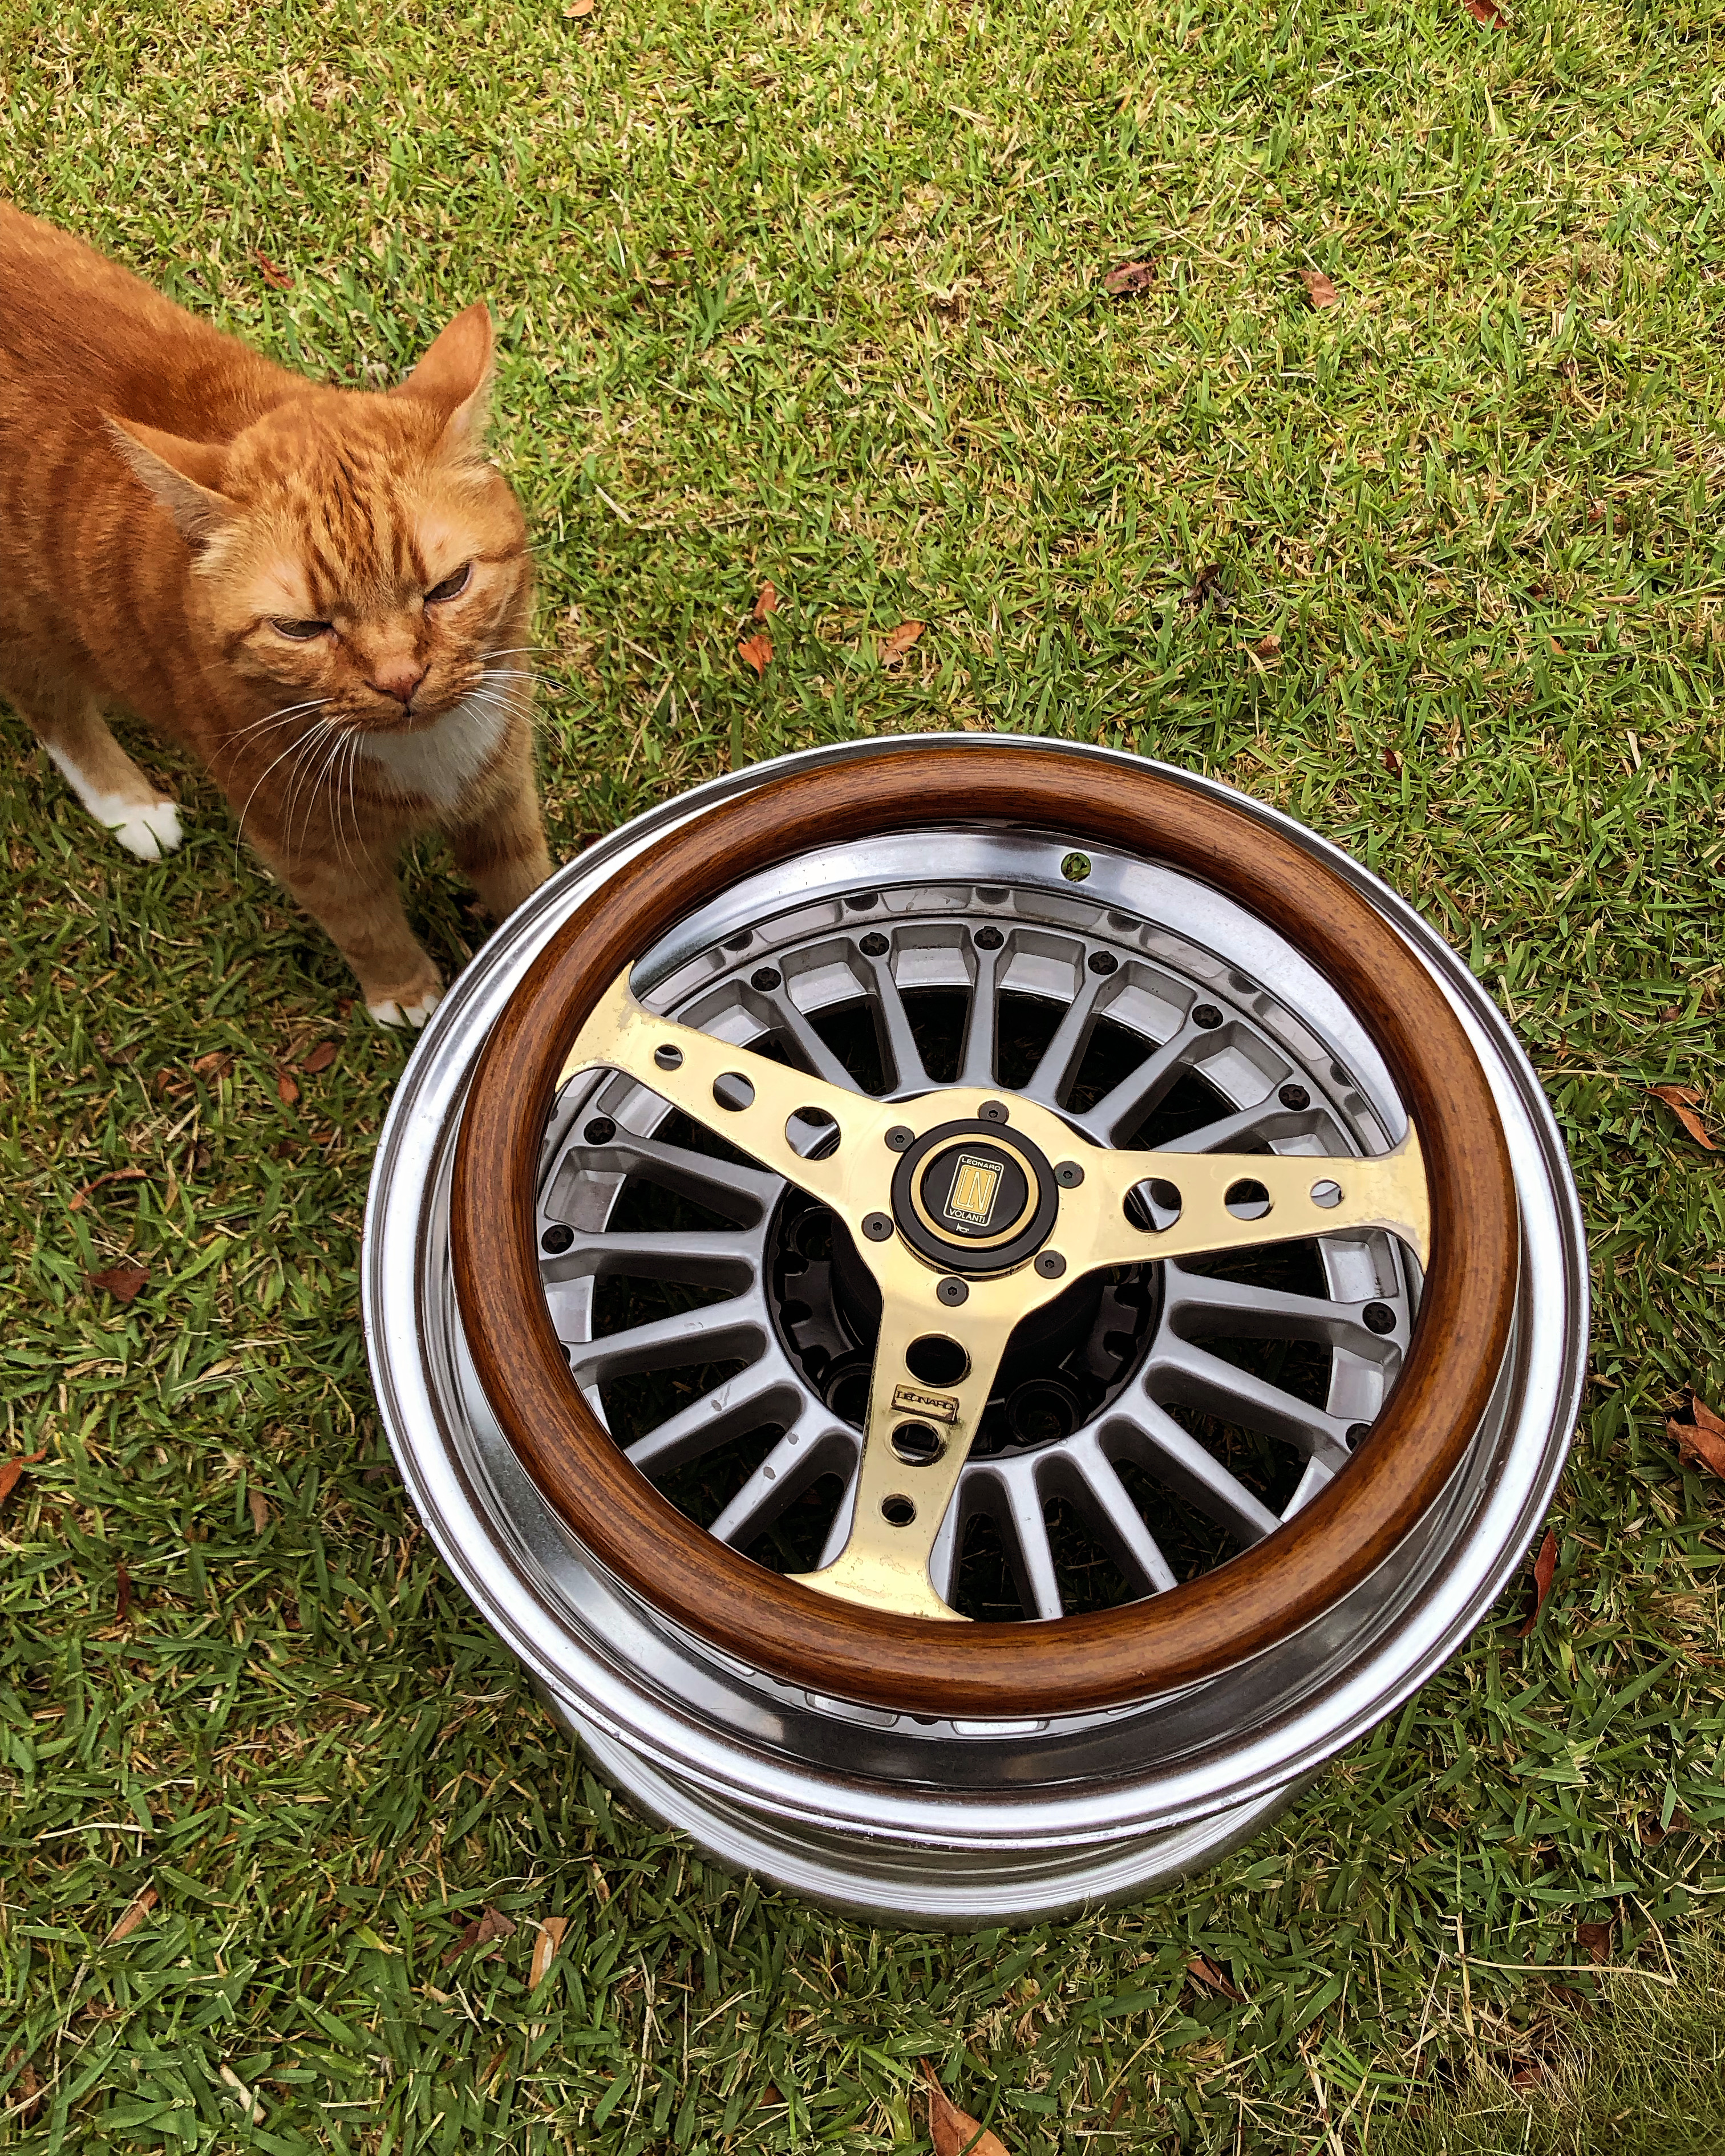 ginger cat standing next to wheel on grass